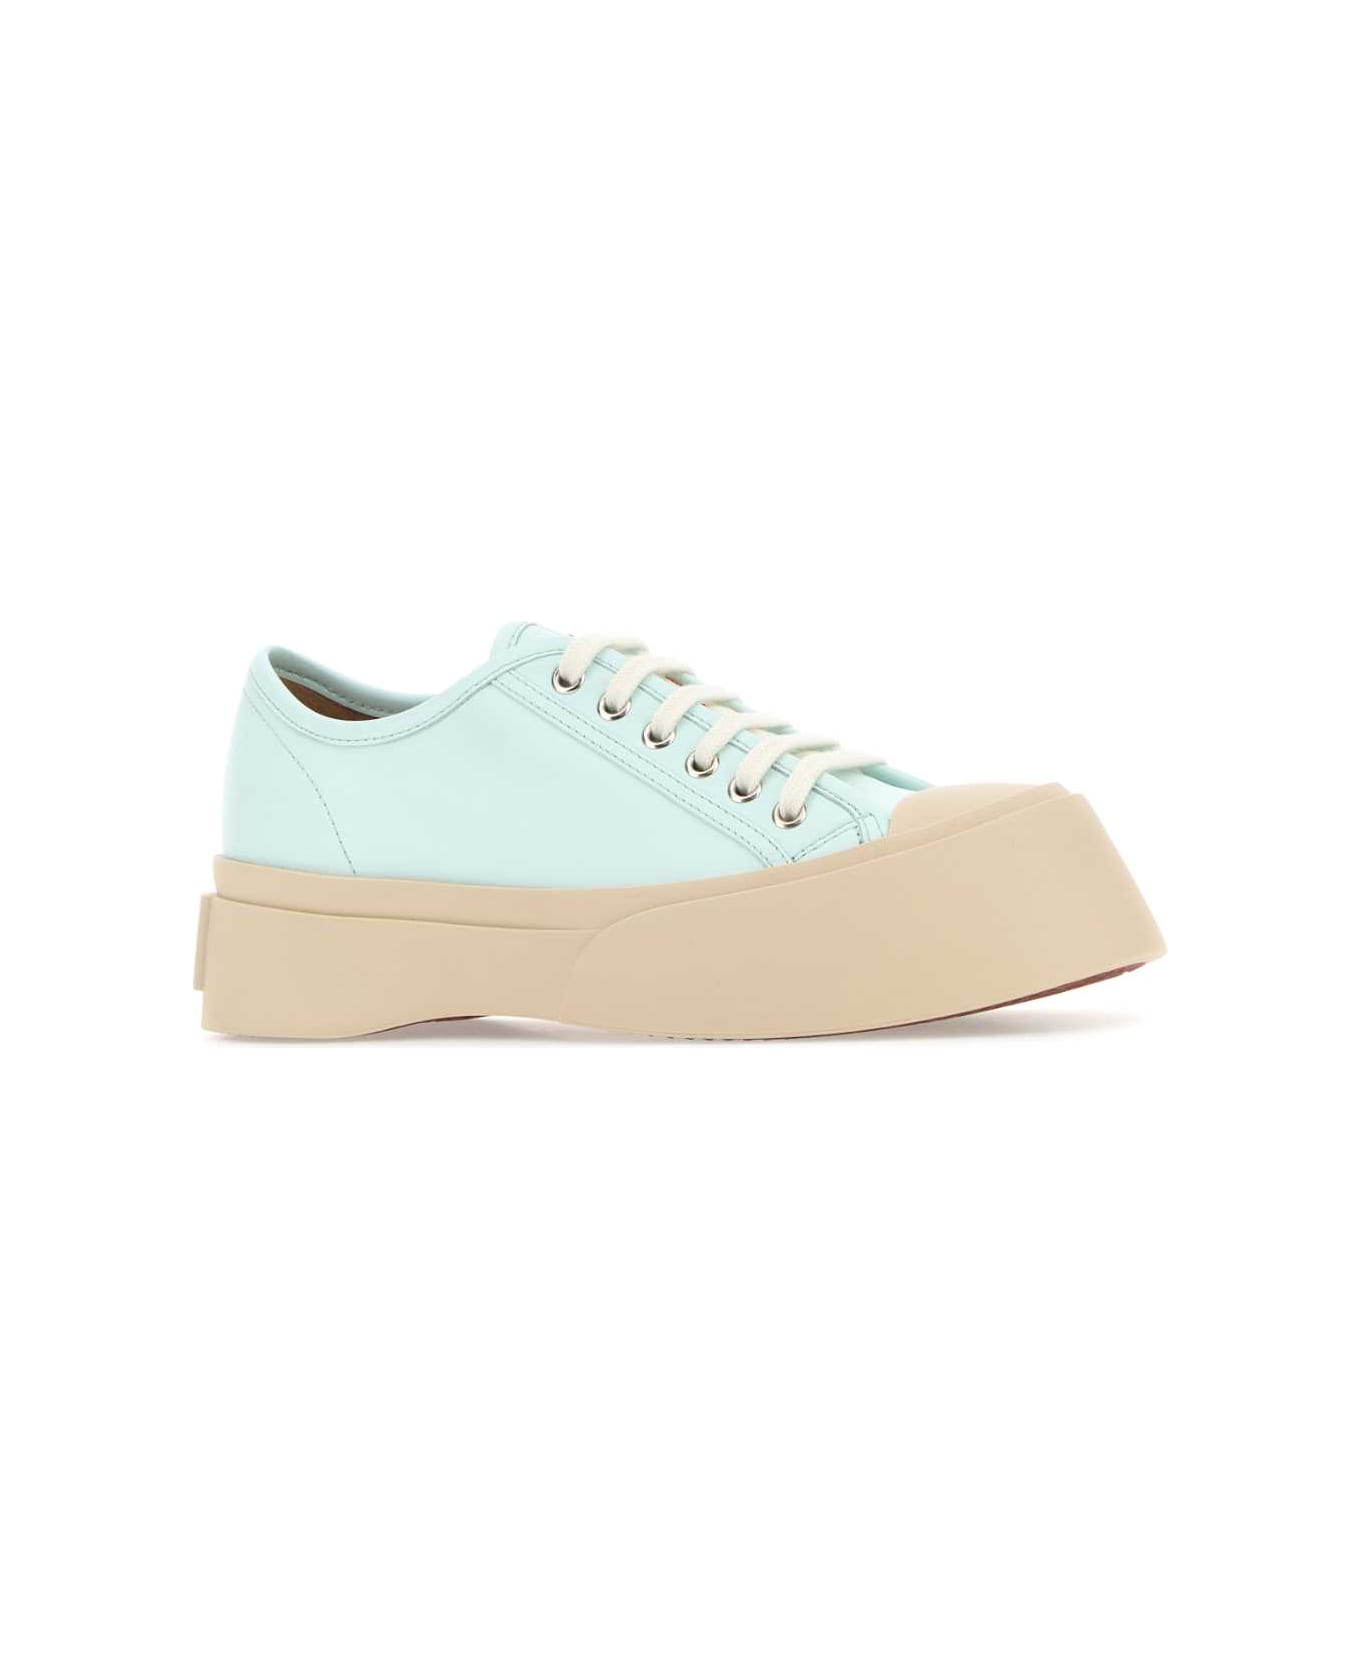 Marni Light Blue Leather Pablo Sneakers - MINERALICE